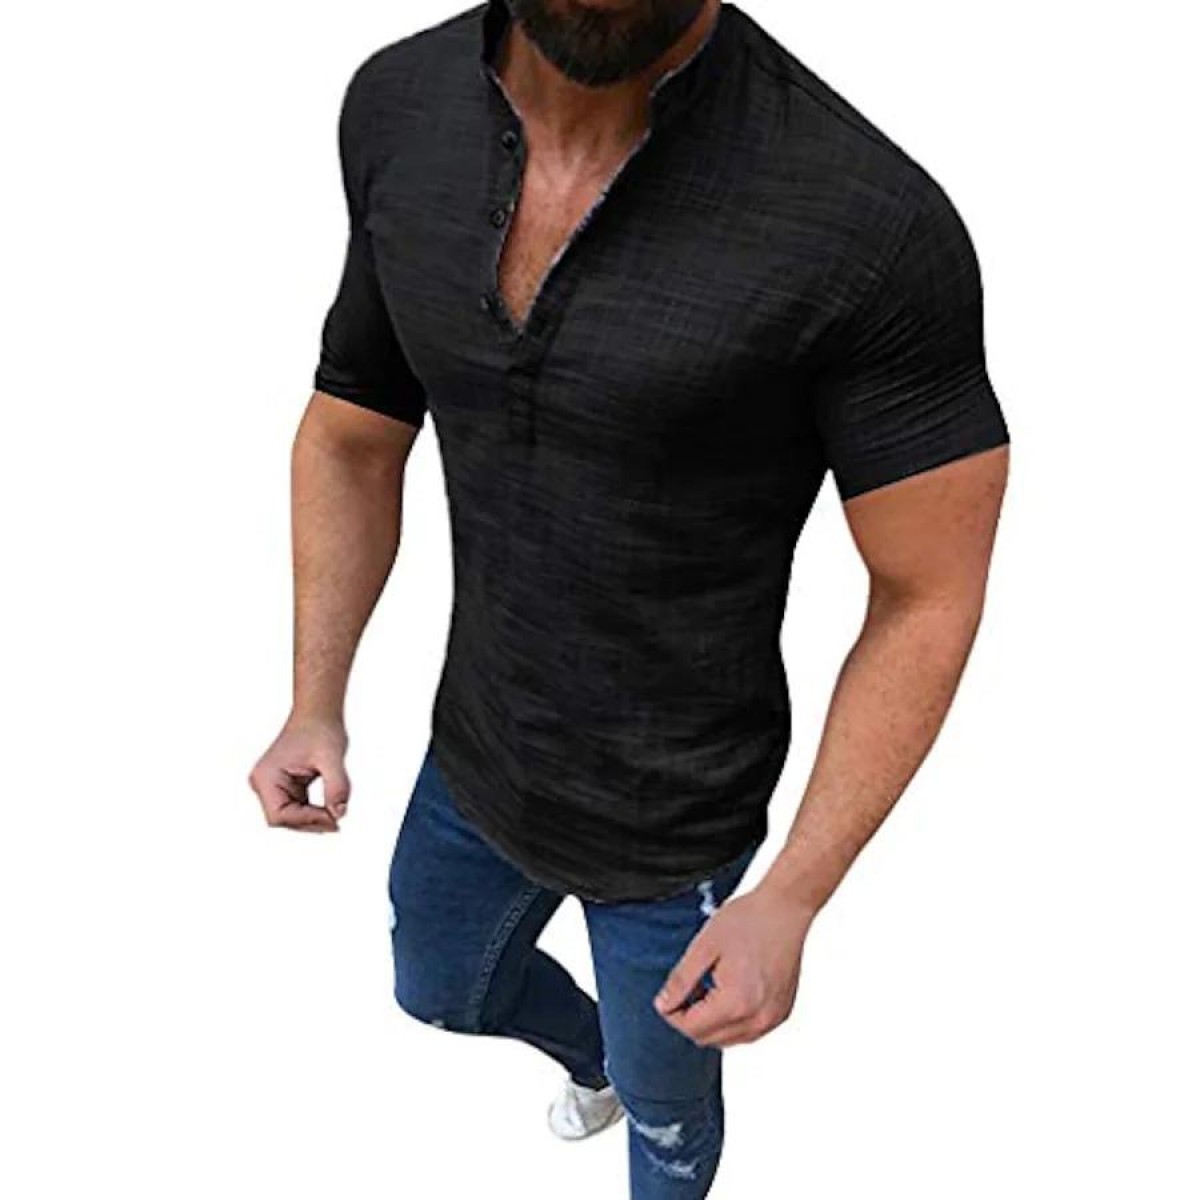 Ayolanni Summer Tops Fashion Man V-Neck Short Sleeve Tops T-Shirt Summer  Solid Button Blouse 